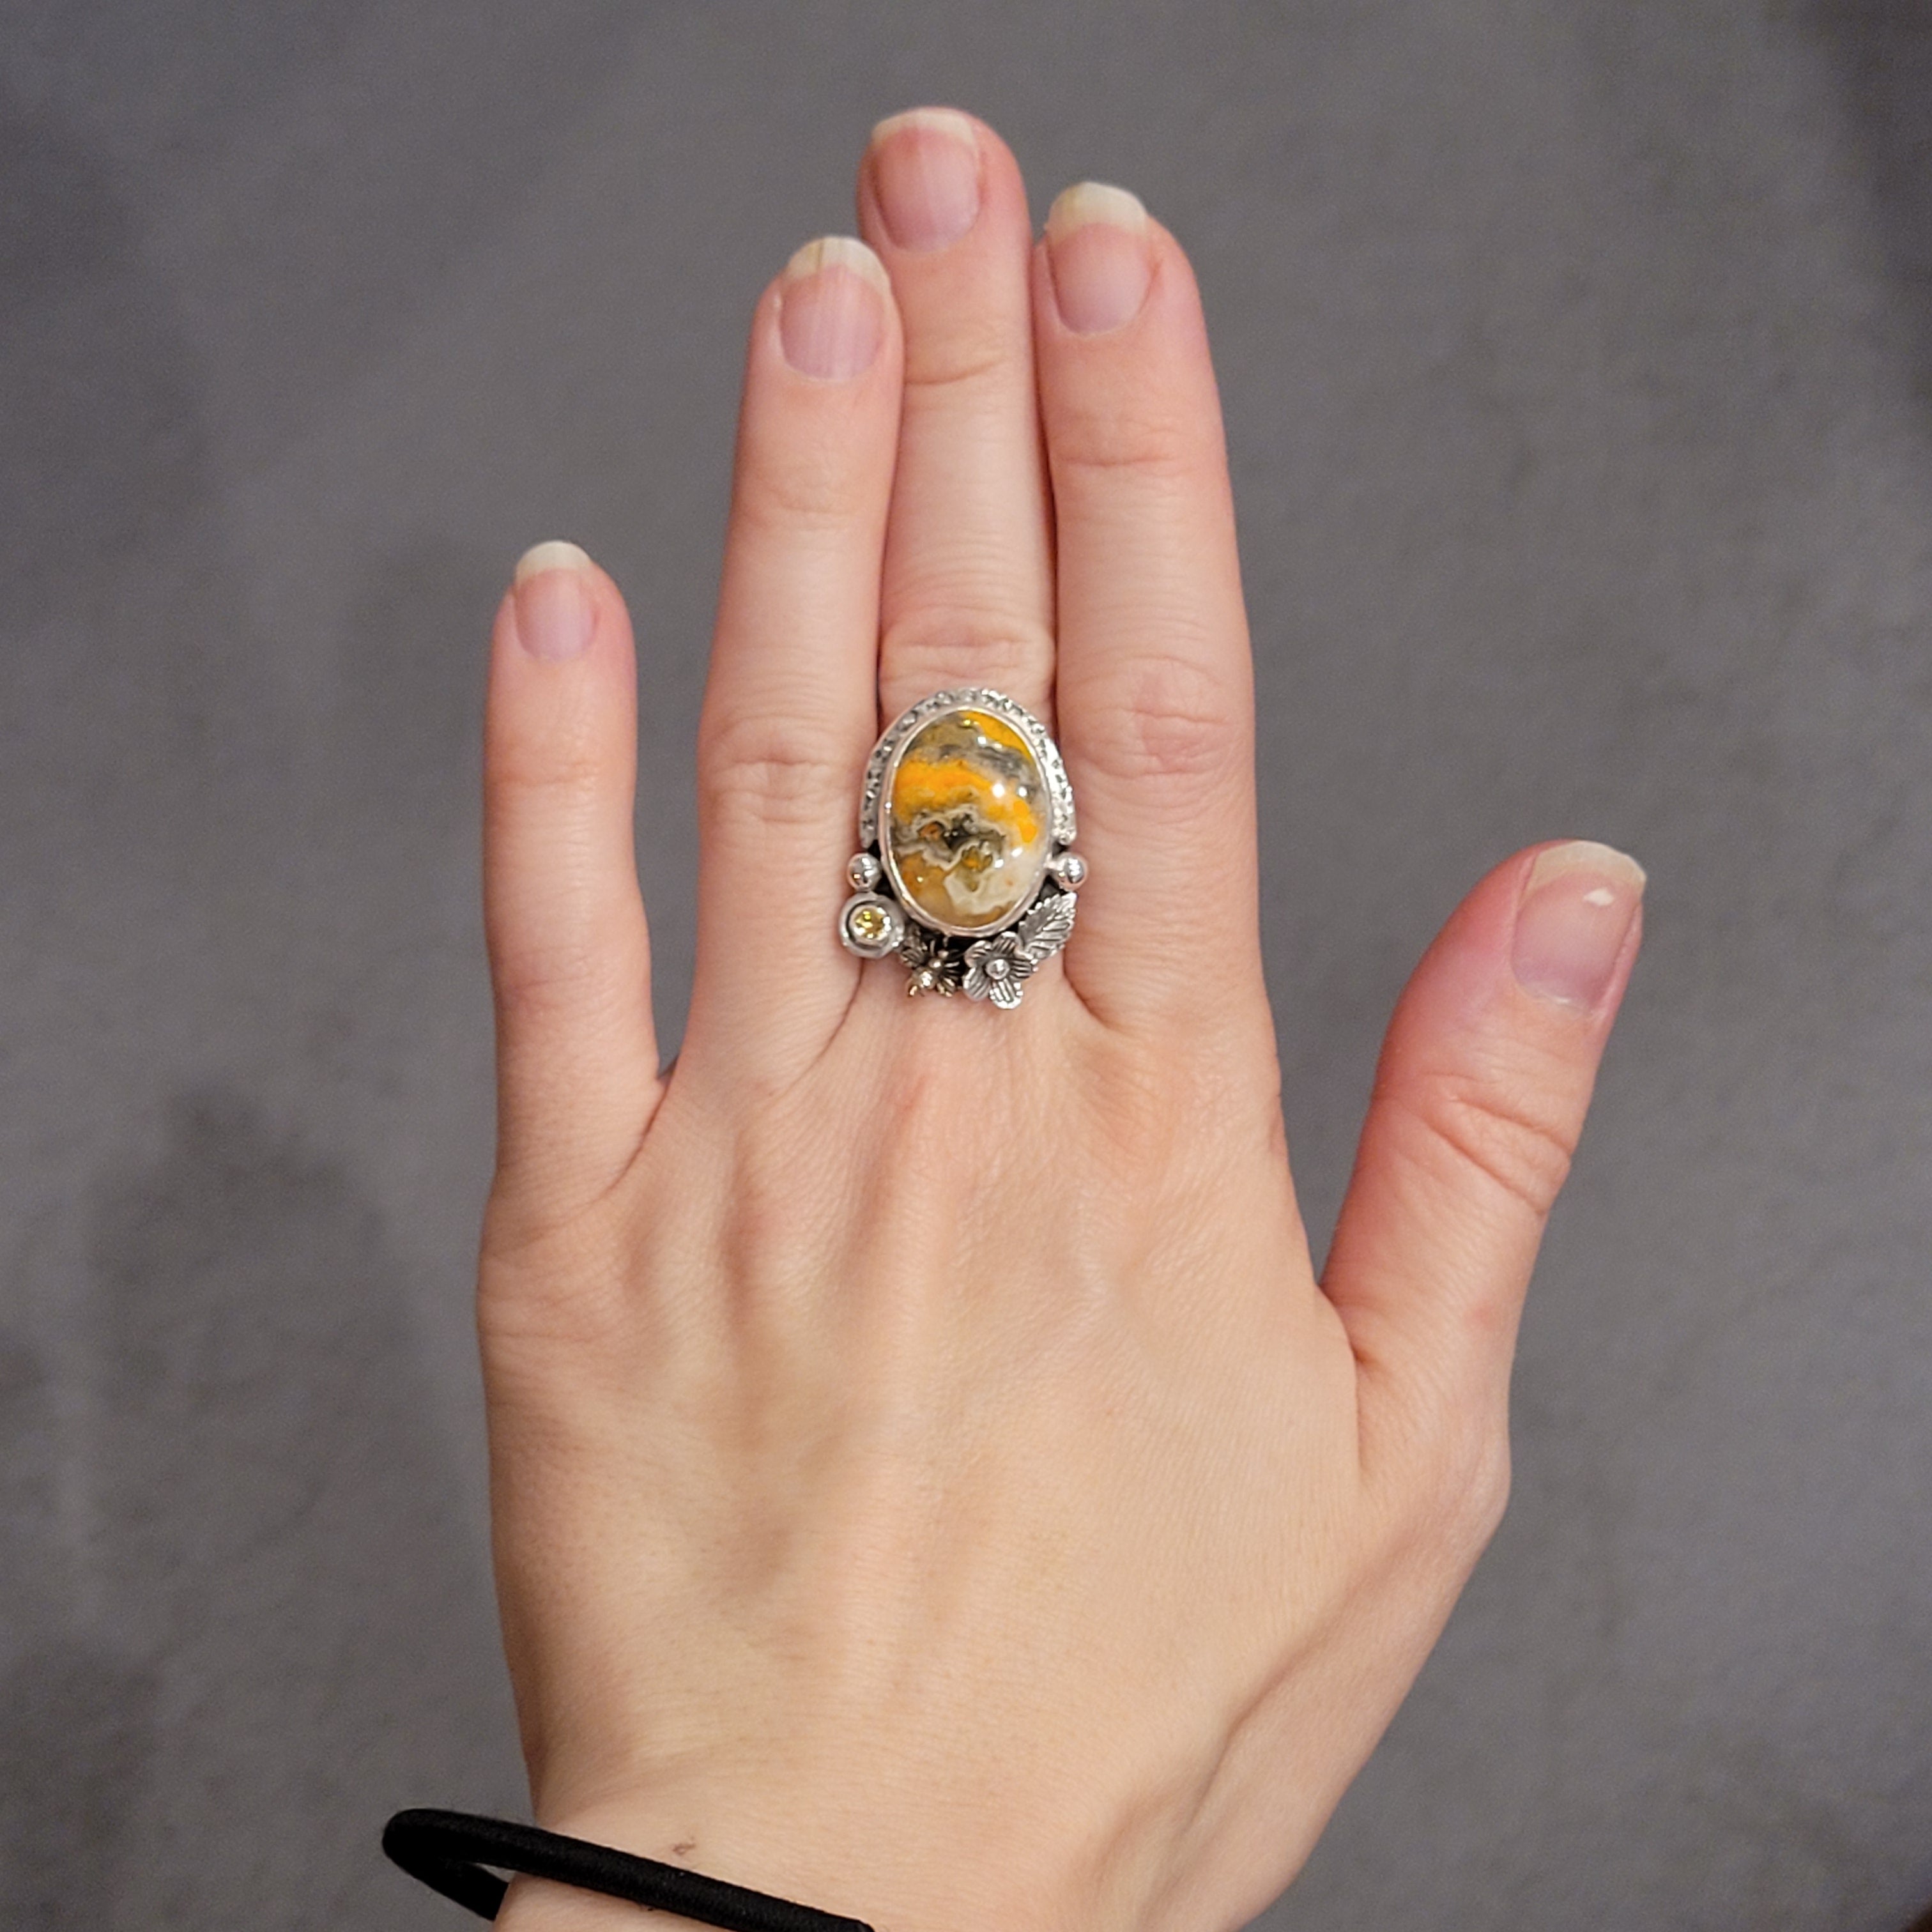 Size 7, Bumblebee Jasper, Citrine and Bronze Bee Sterling Silver Ring